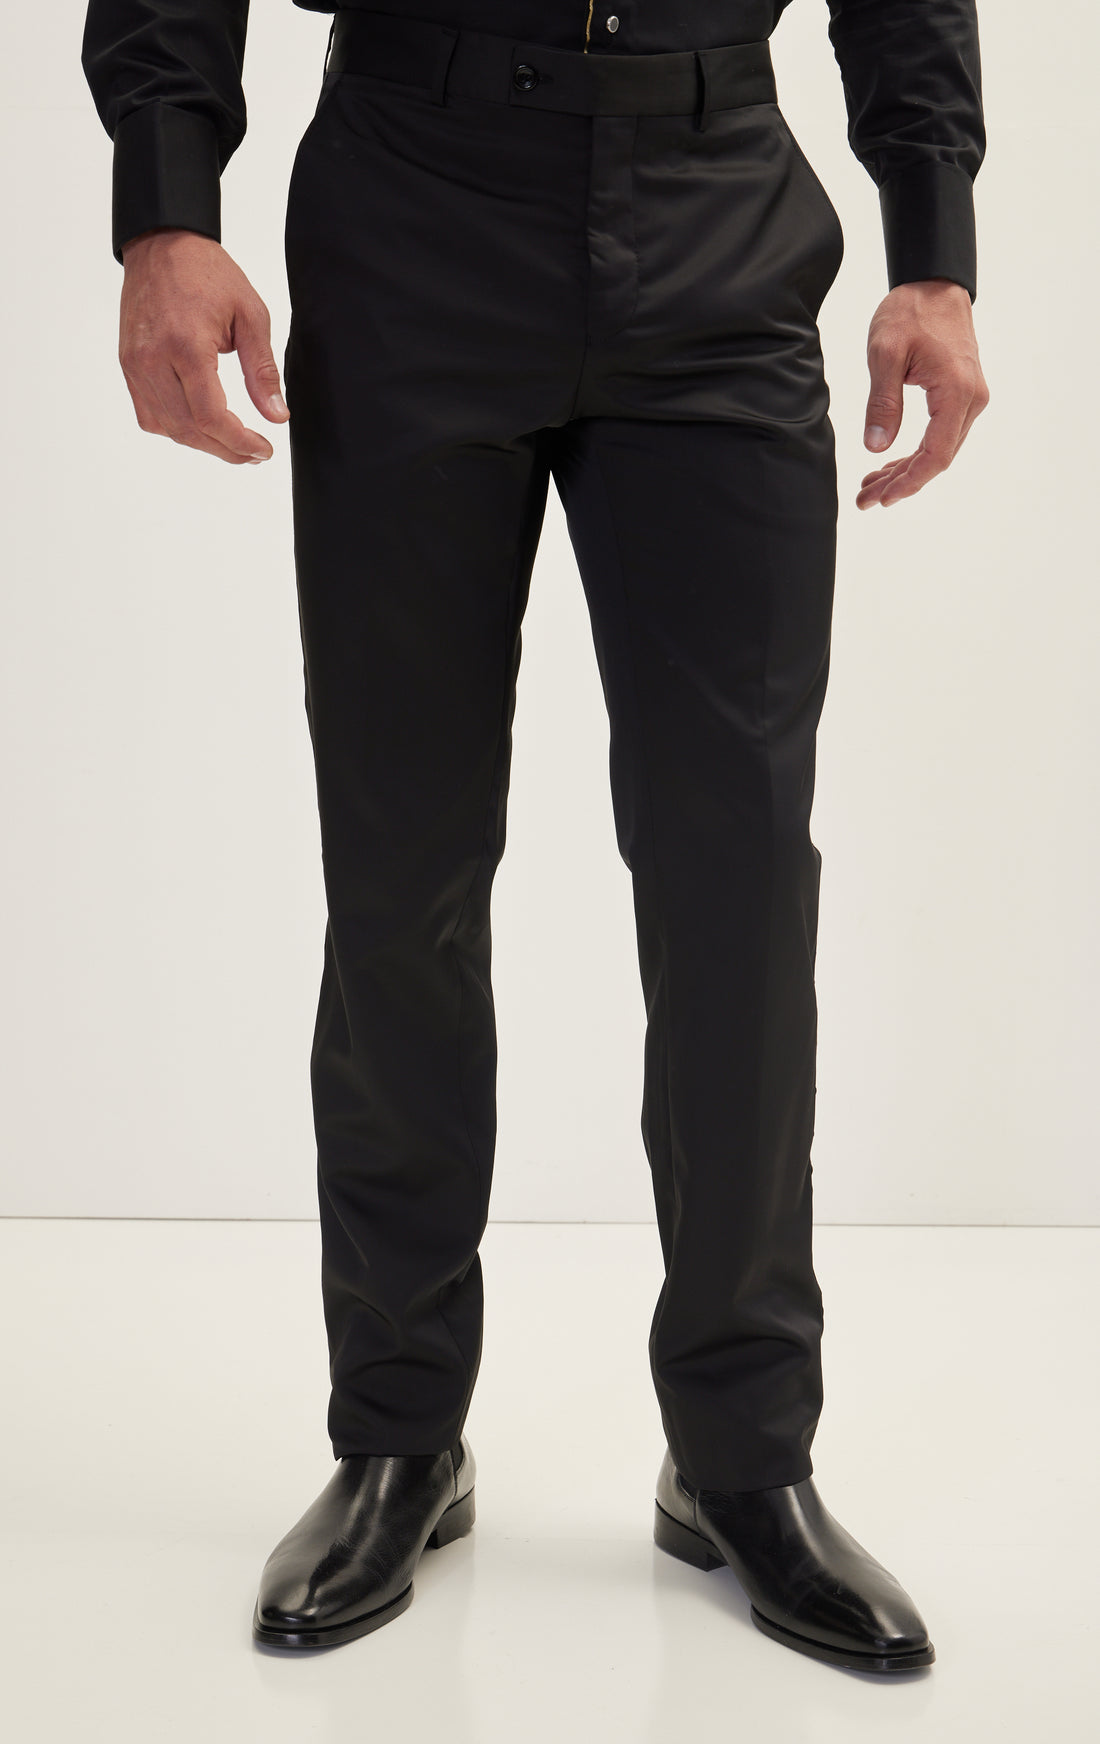 Striped Fitted Tuxedo Pants - Black